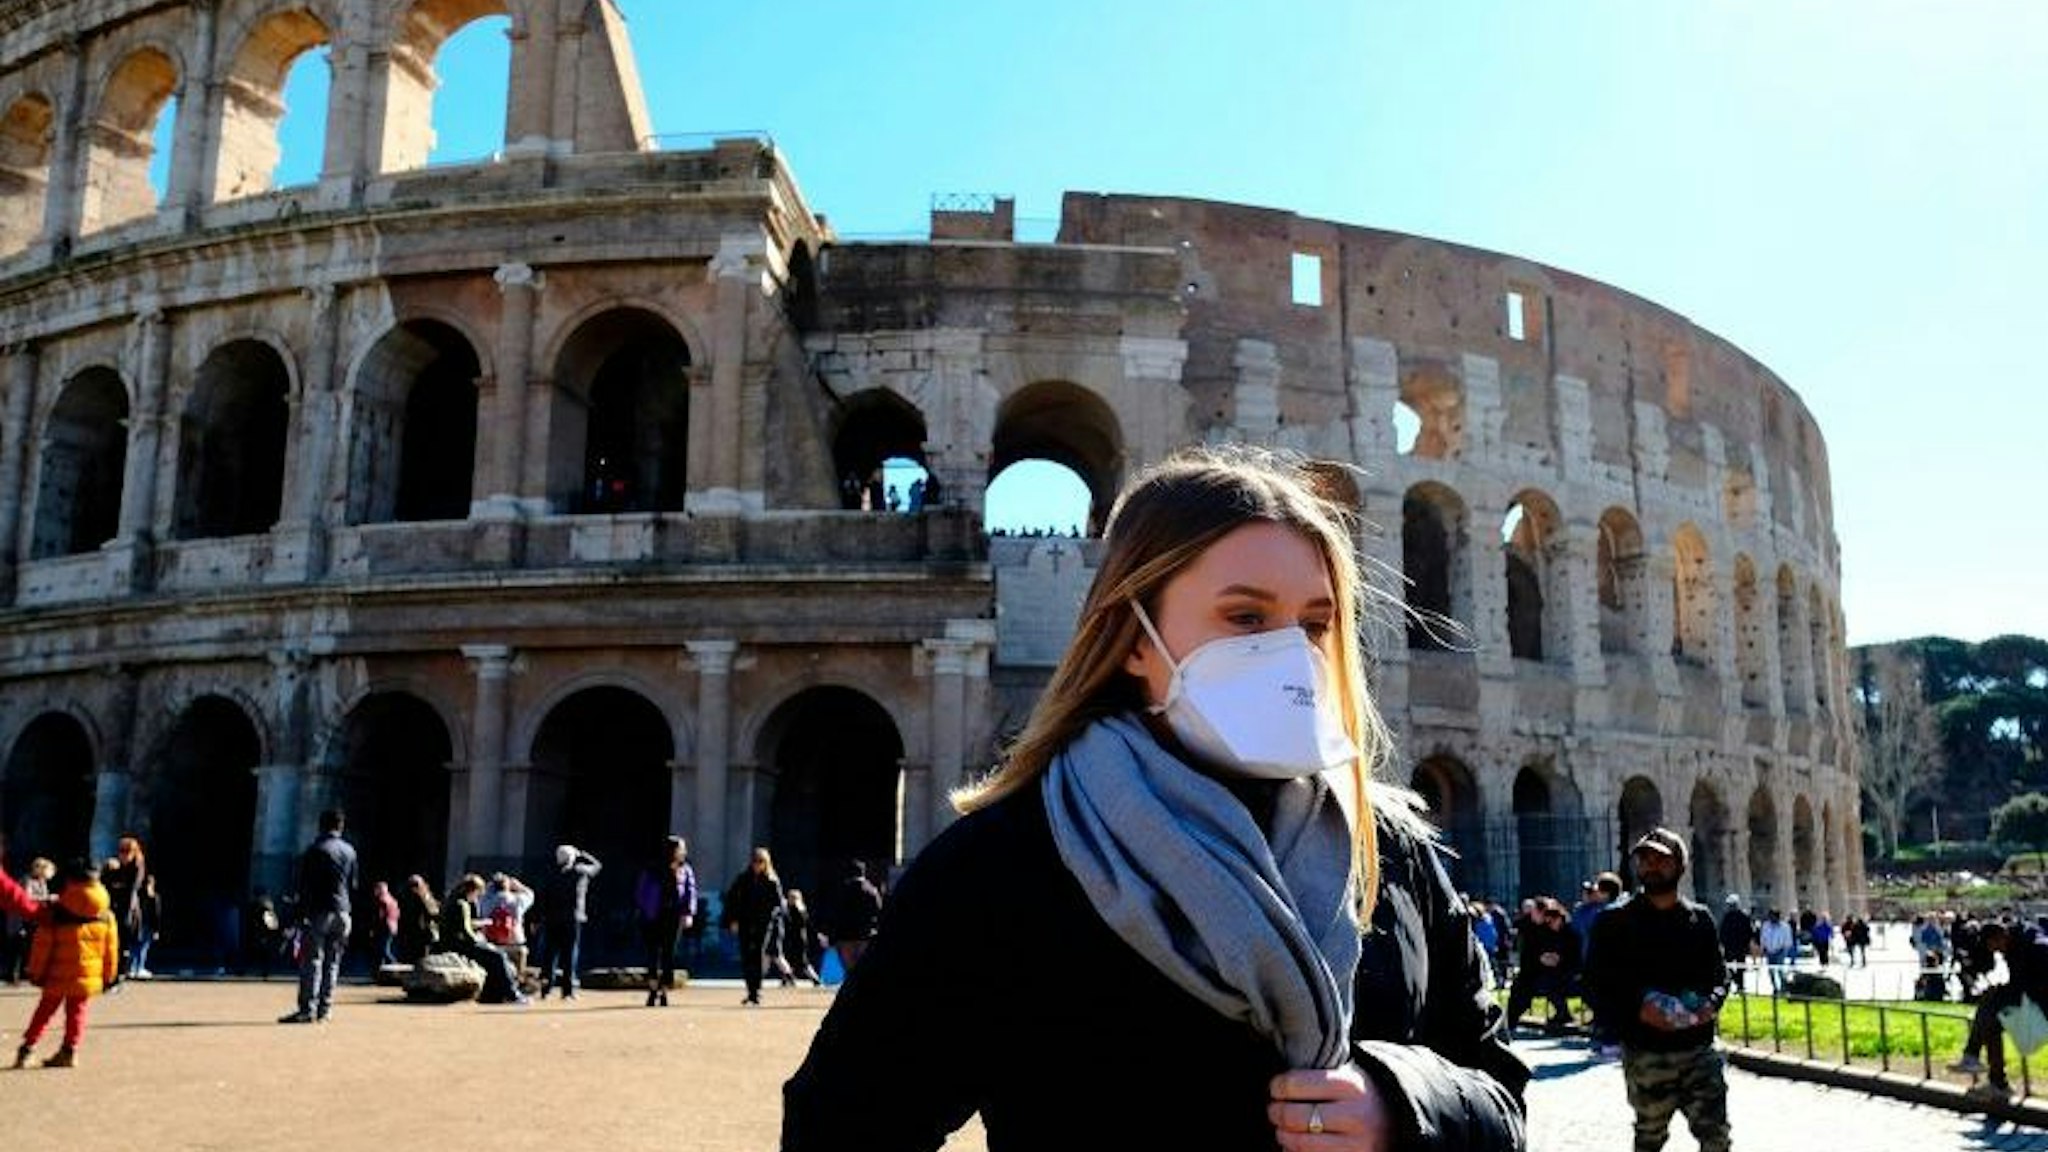 Tourist wearing a protective respiratory mask tours outside the Colosseo monument (Colisee, Coliseum) in downtown Rome on February 28, 2020 amid fear of Covid-19 epidemic. - Since February 23, more than 50,000 people have been confined to 10 towns in Lombardy and one in Veneto -- a drastic measure taken to halt the spread of the new coronavirus, which has infected some 400 people in Italy, mostly in the north.